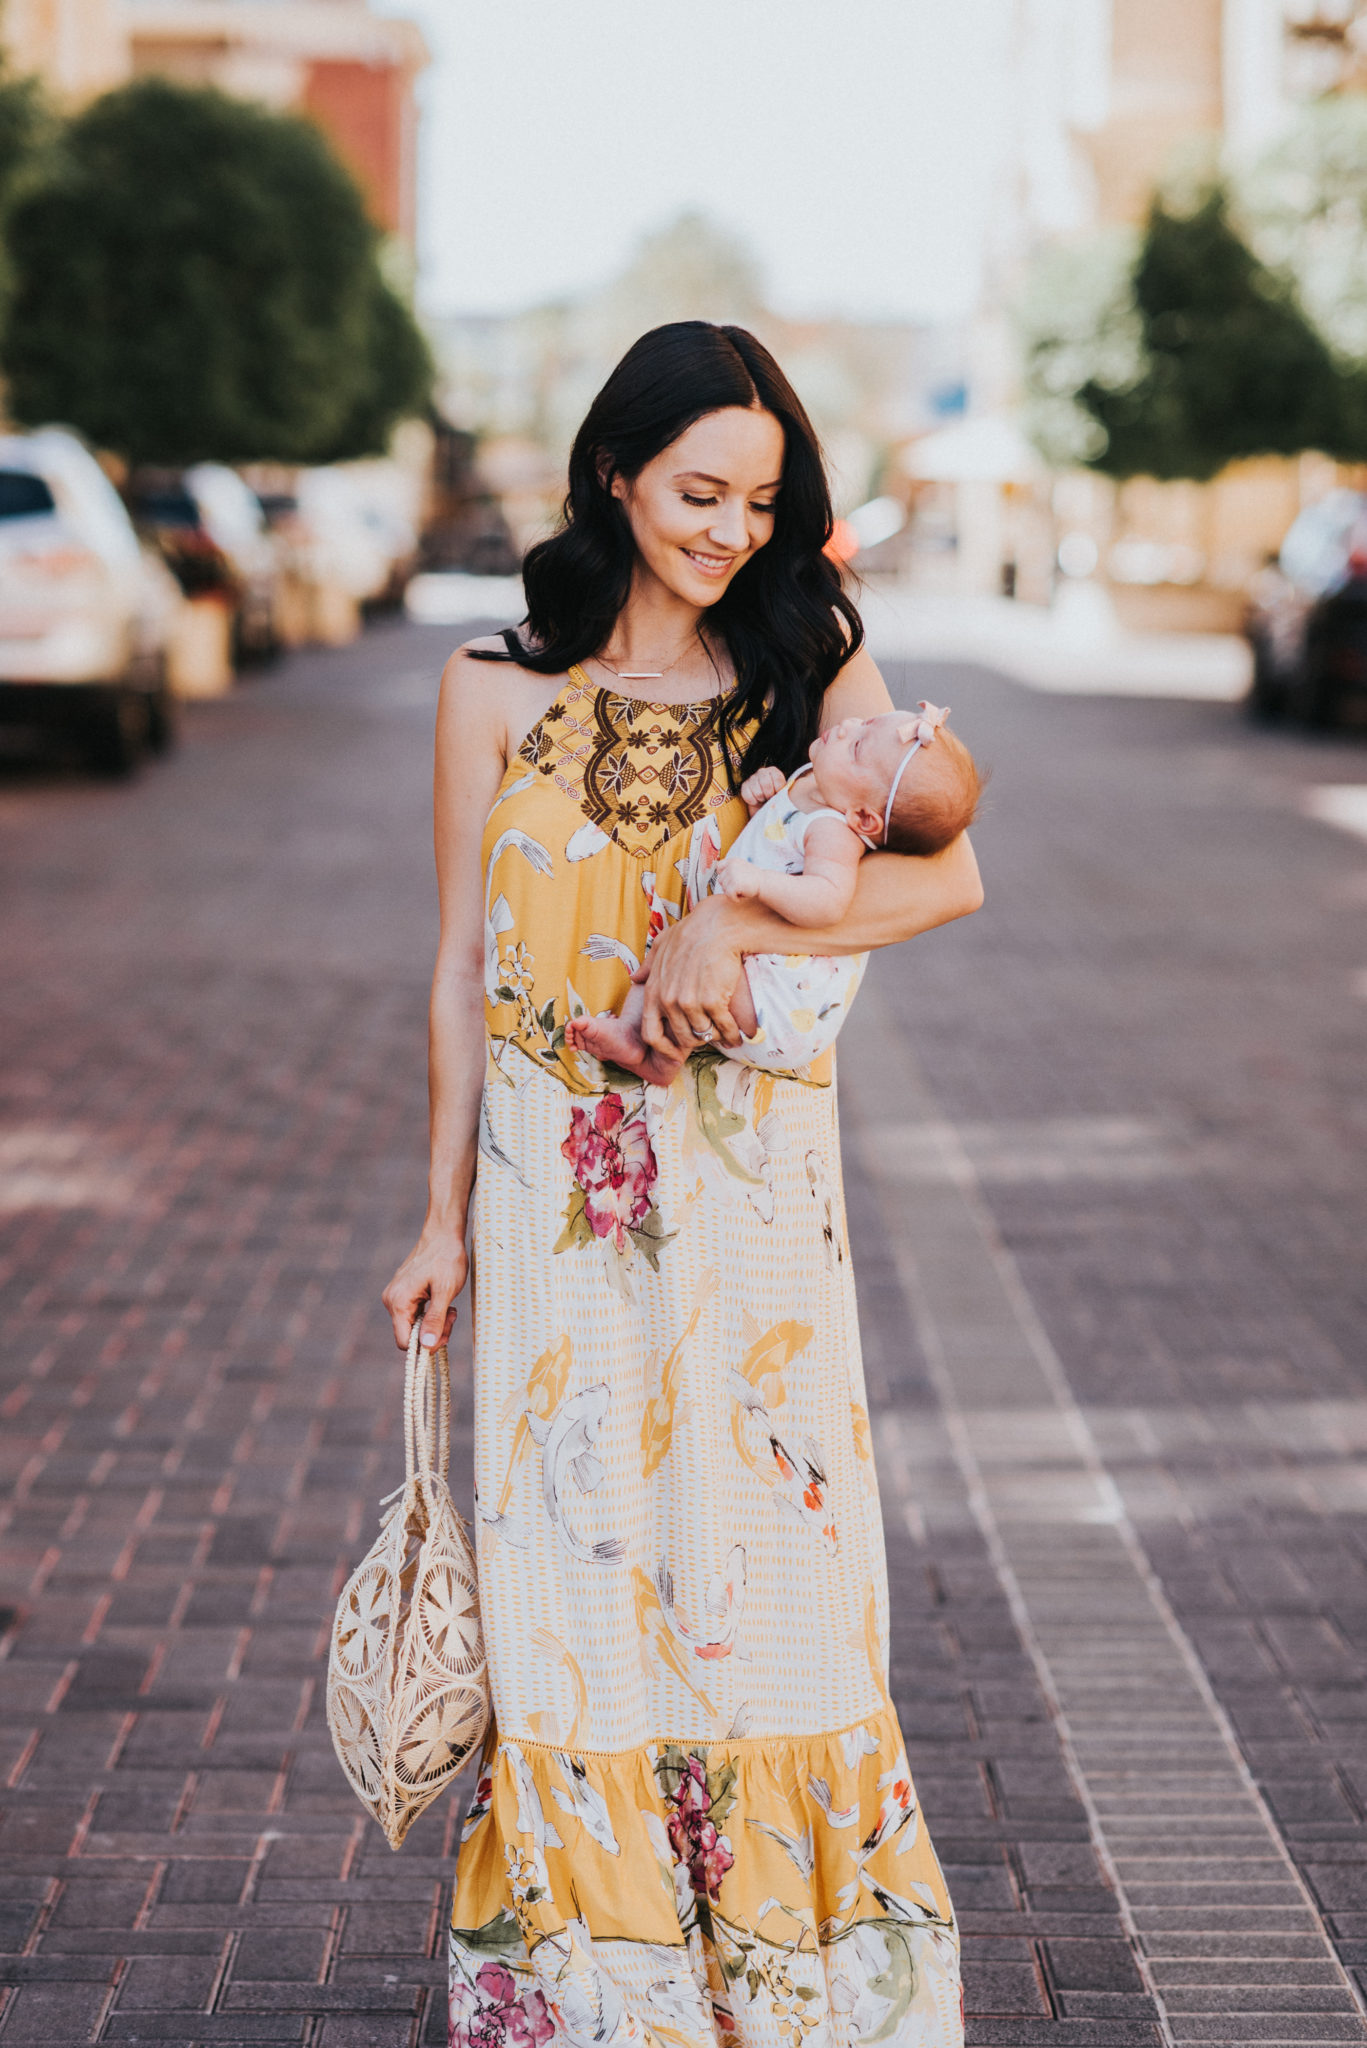 Summer Vacation Dresses styled by popular Las Vegas style blogger, Outfits & outings